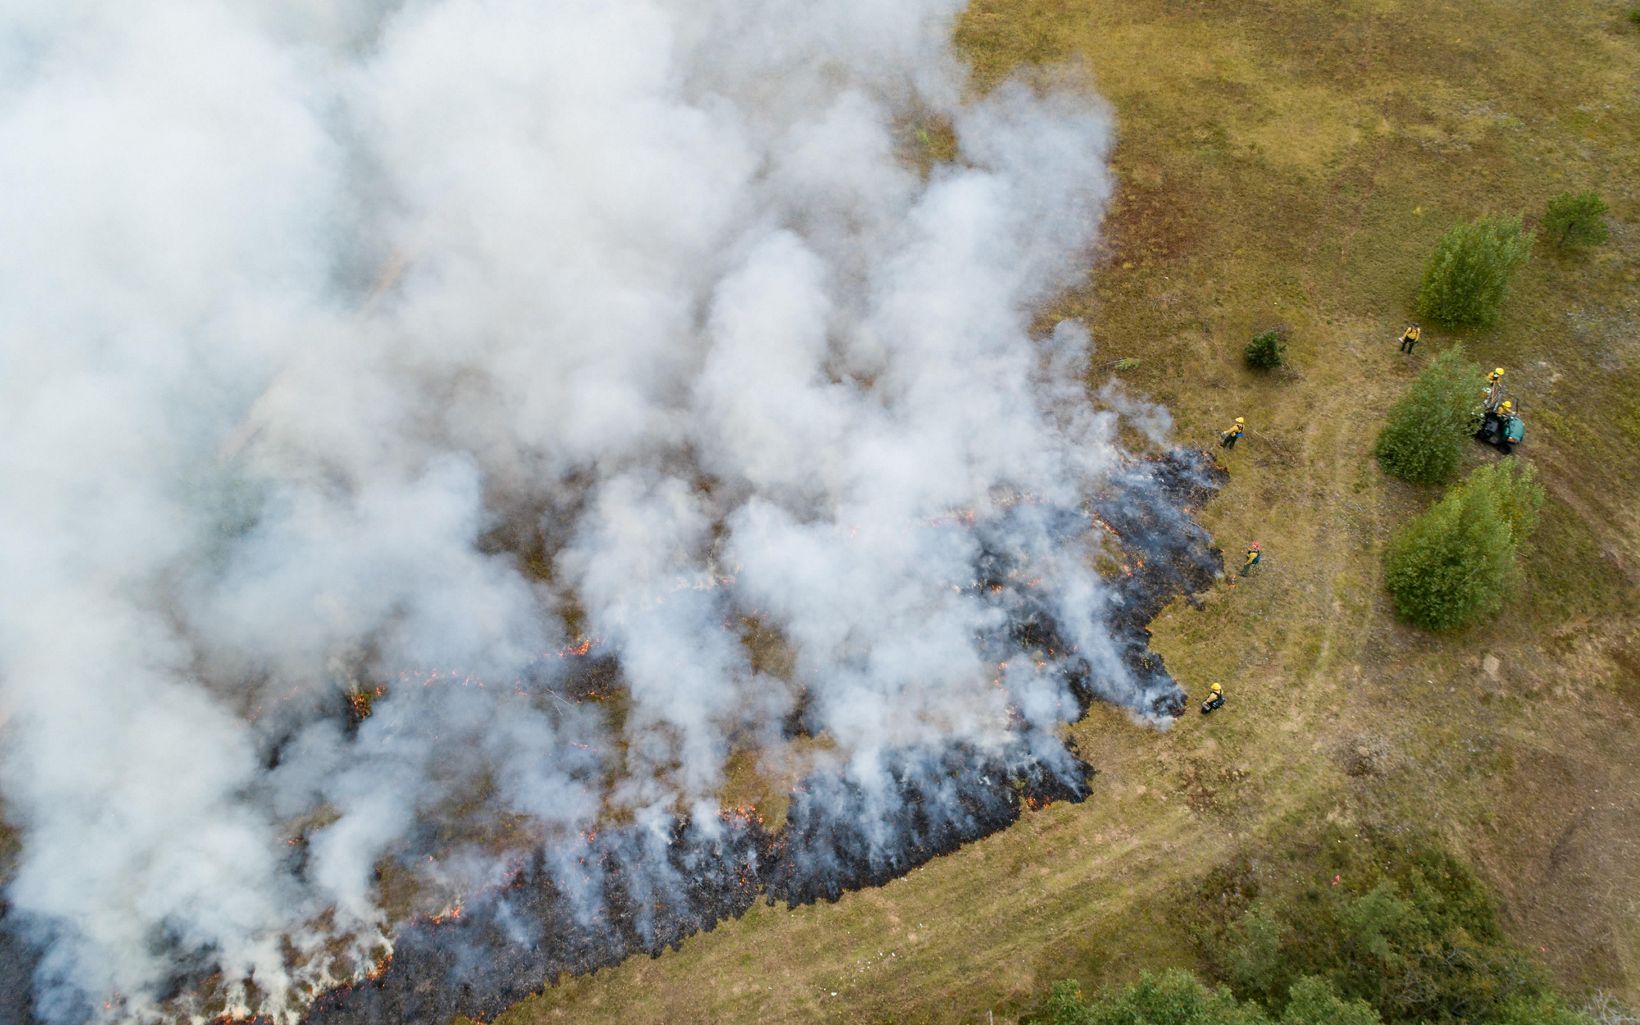 Crew members work the edges of a controlled burn on the grassland at Kennebunk Plains Preserve.